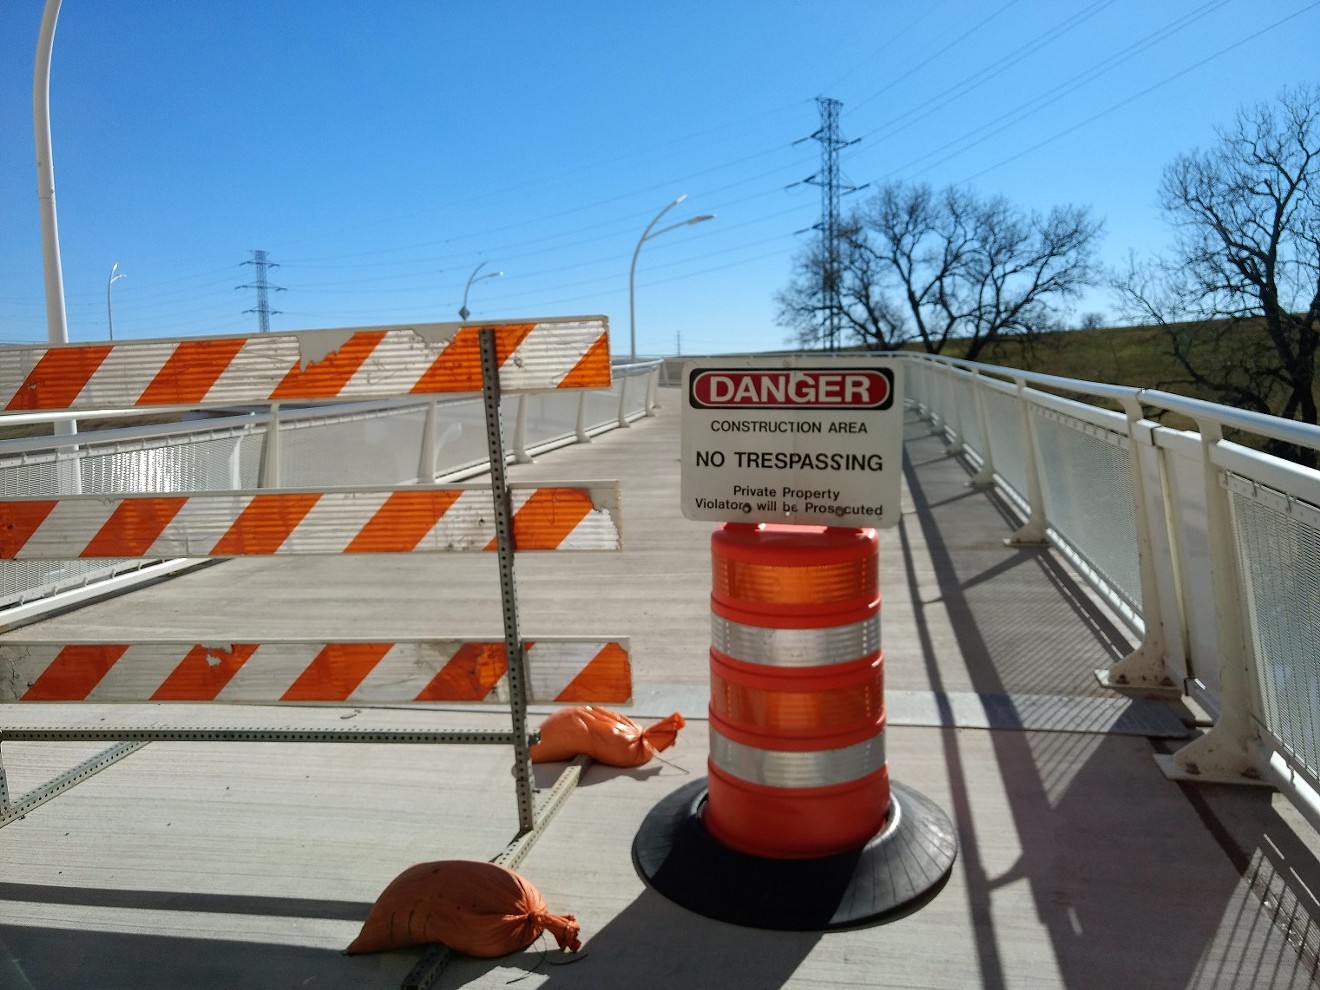 Signs warn that anyone entering the bridge will be prosecuted.